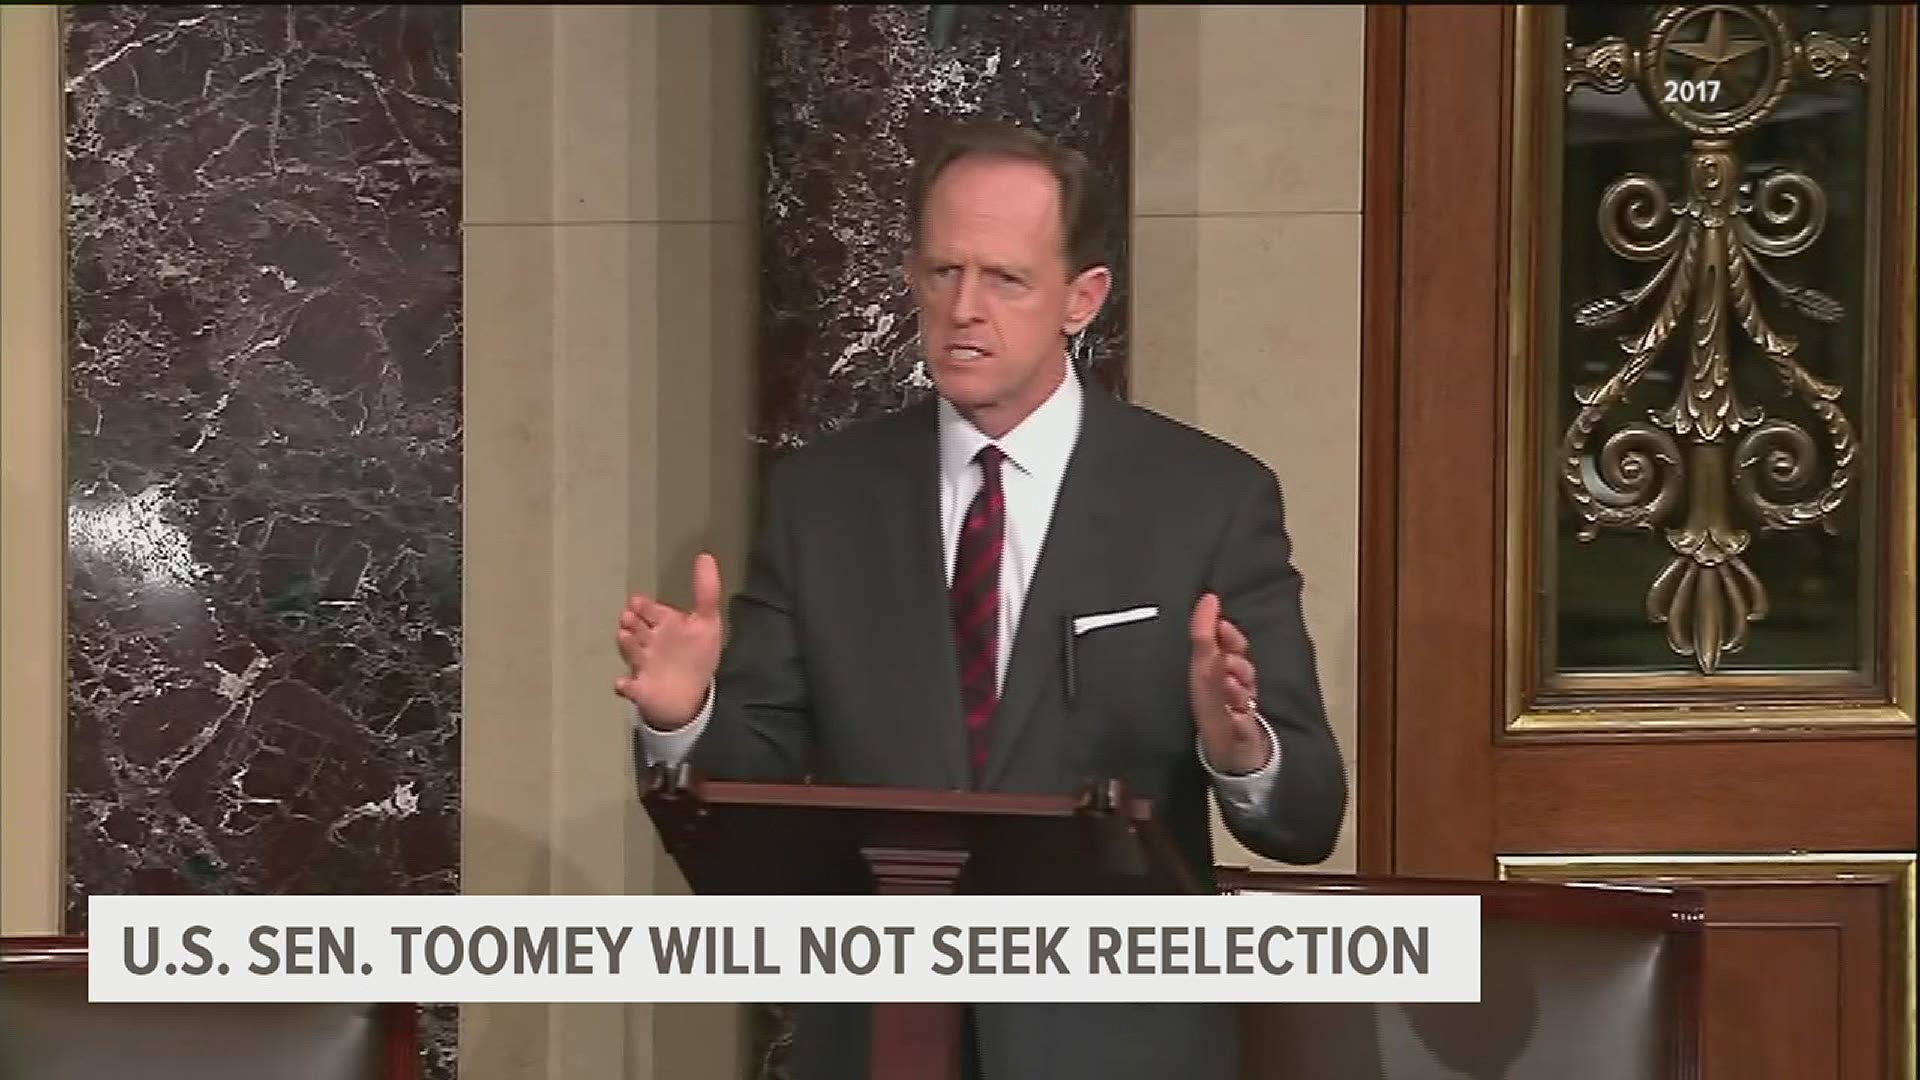 Senator Toomey says it is time for him to move away from politics, and  he will not be seeking re-election in 2022.